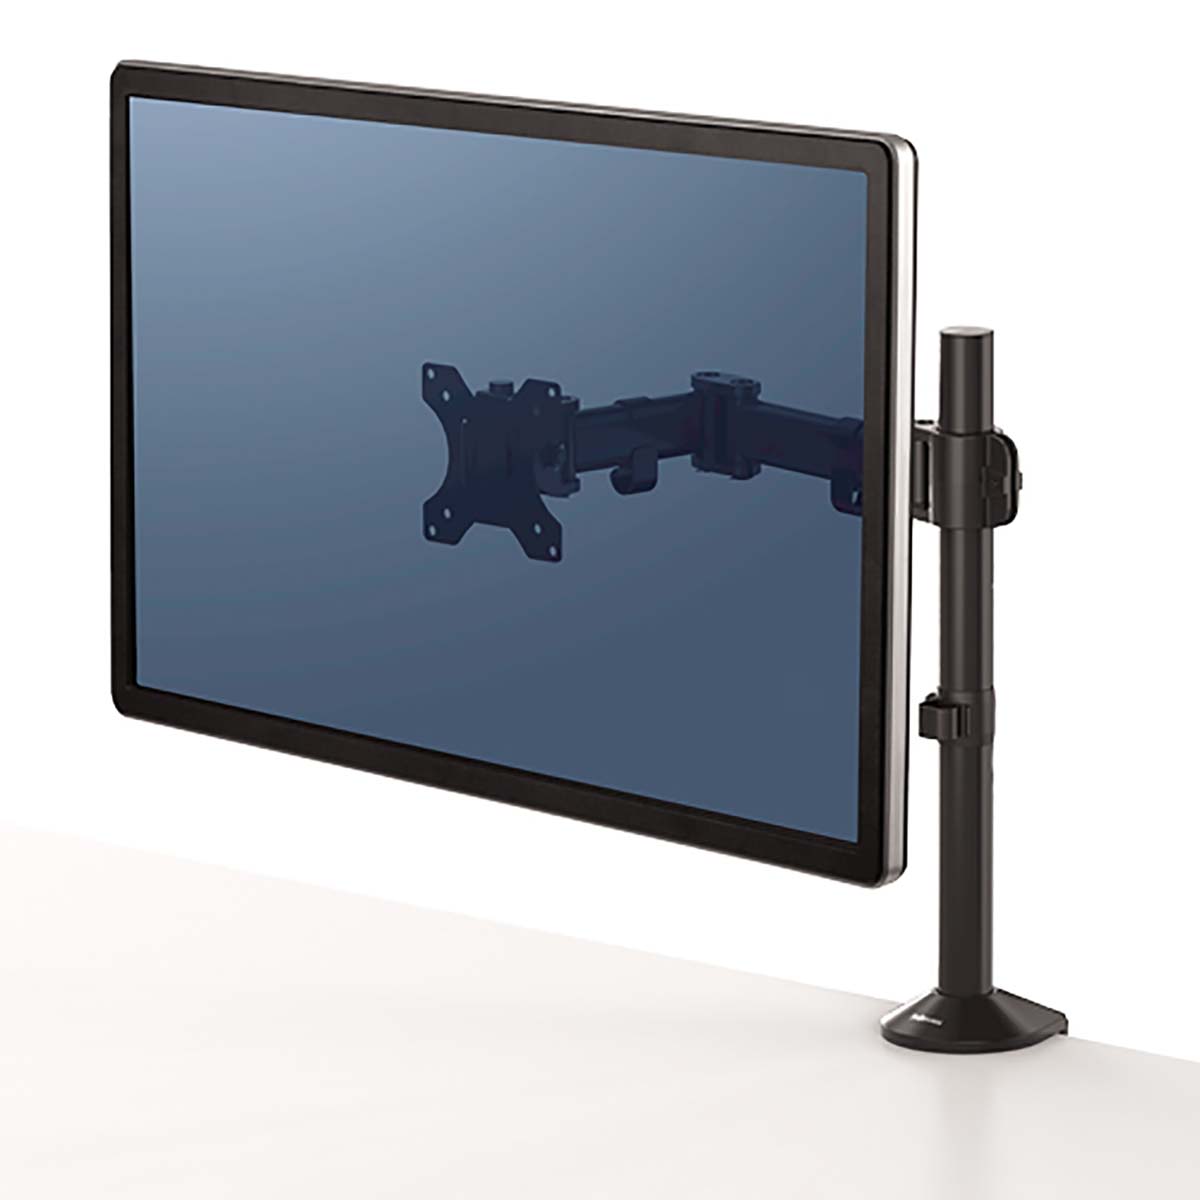 Fellowes for 1 x Screen, 32" ( 81.28cm) Screen Size